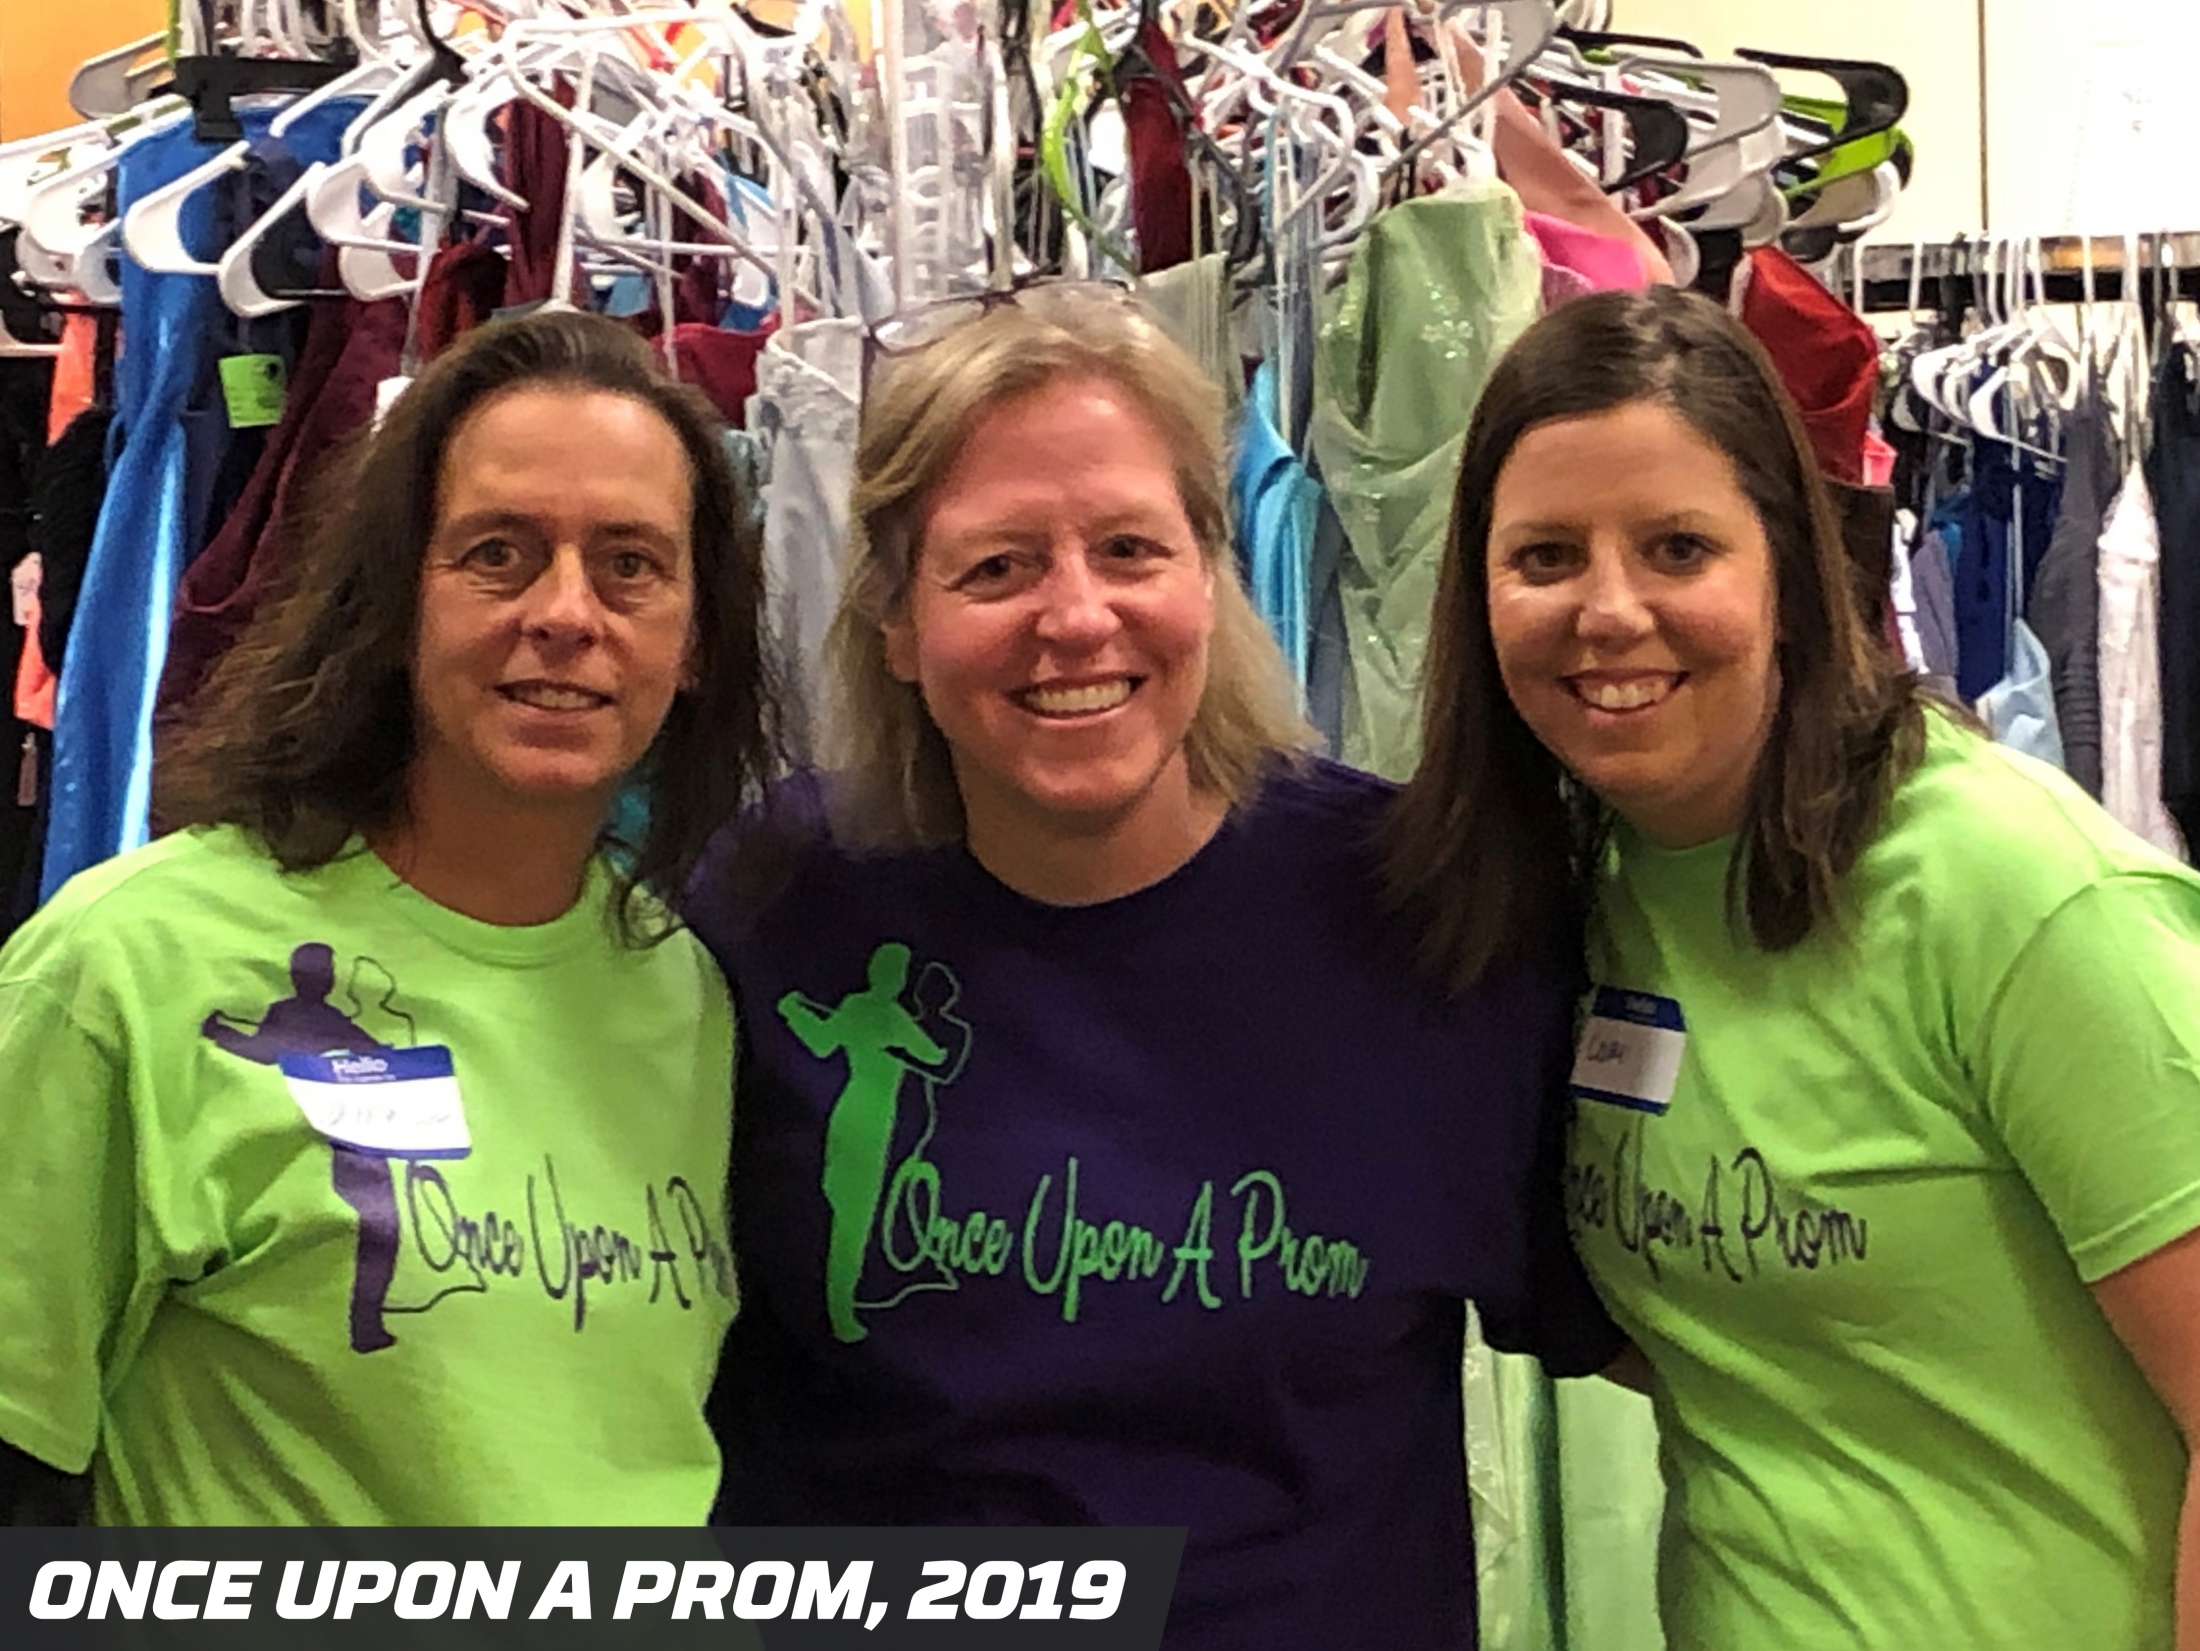 Precision Pipeline Community Involvement: Once Upon a Prom 2019